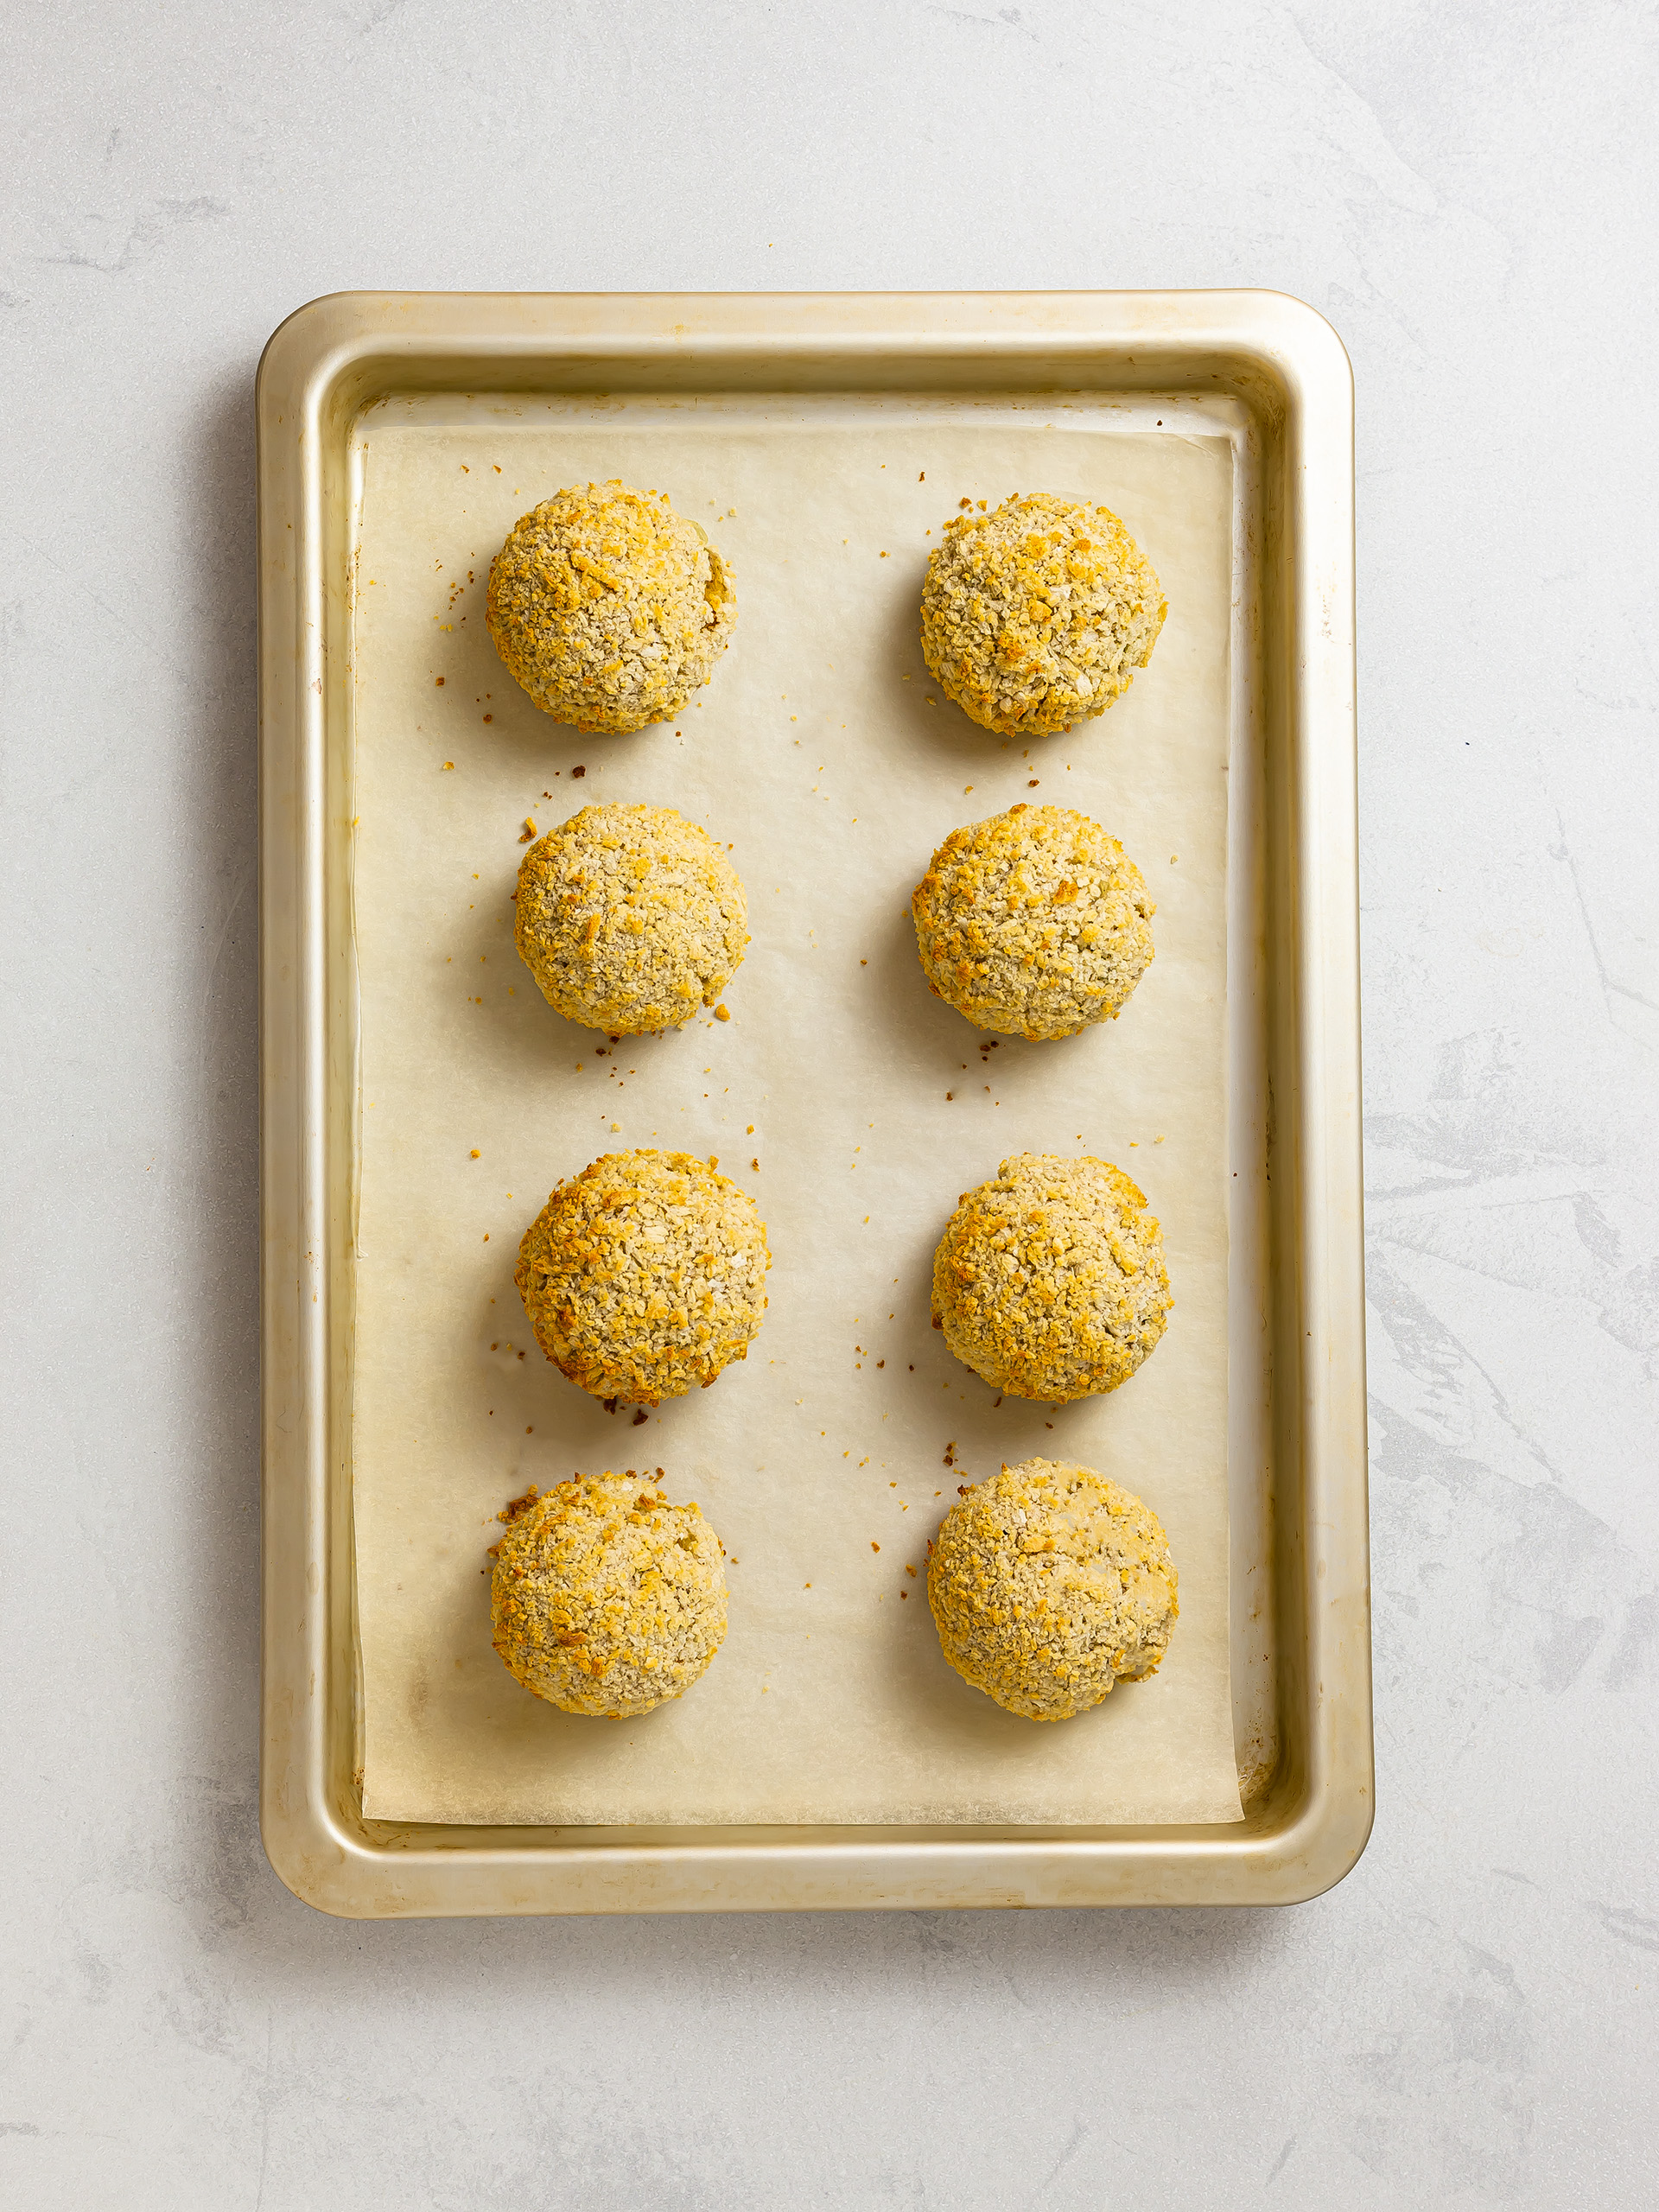 oven baked potato croquettes